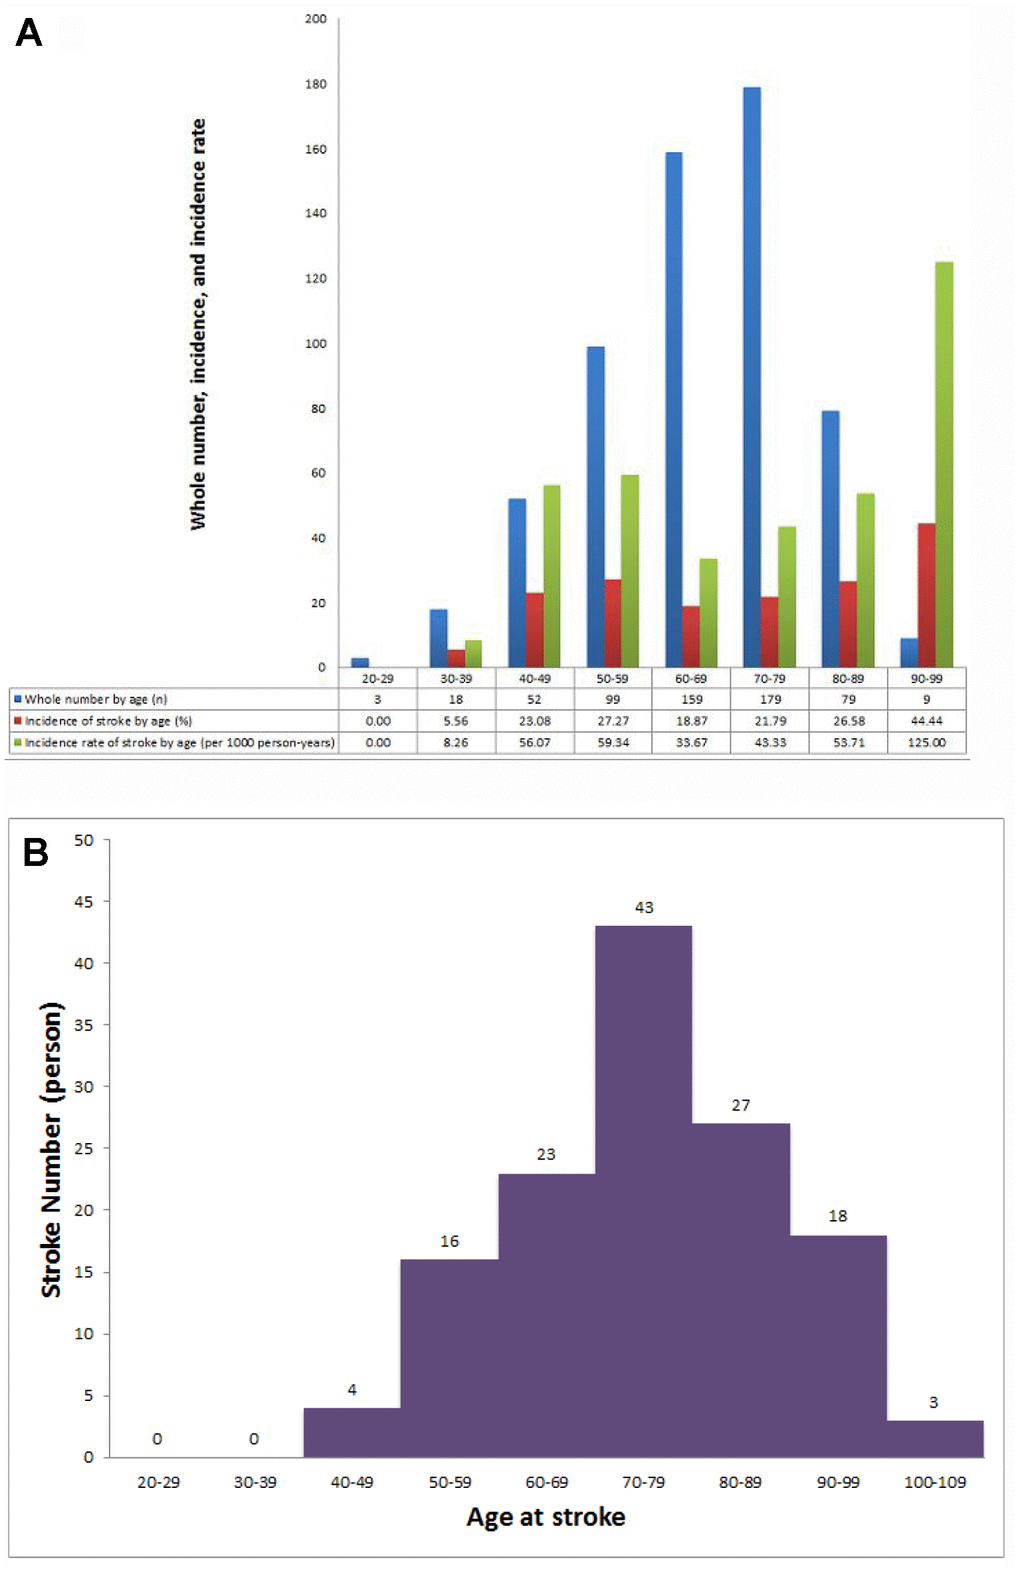 Incidence of stroke in patients with HCM and AF. (A) Whole number, stroke incidence, and incidence rate of stroke in patients with HCM and AF at different ages. (B) Distribution of age at stroke presentation.